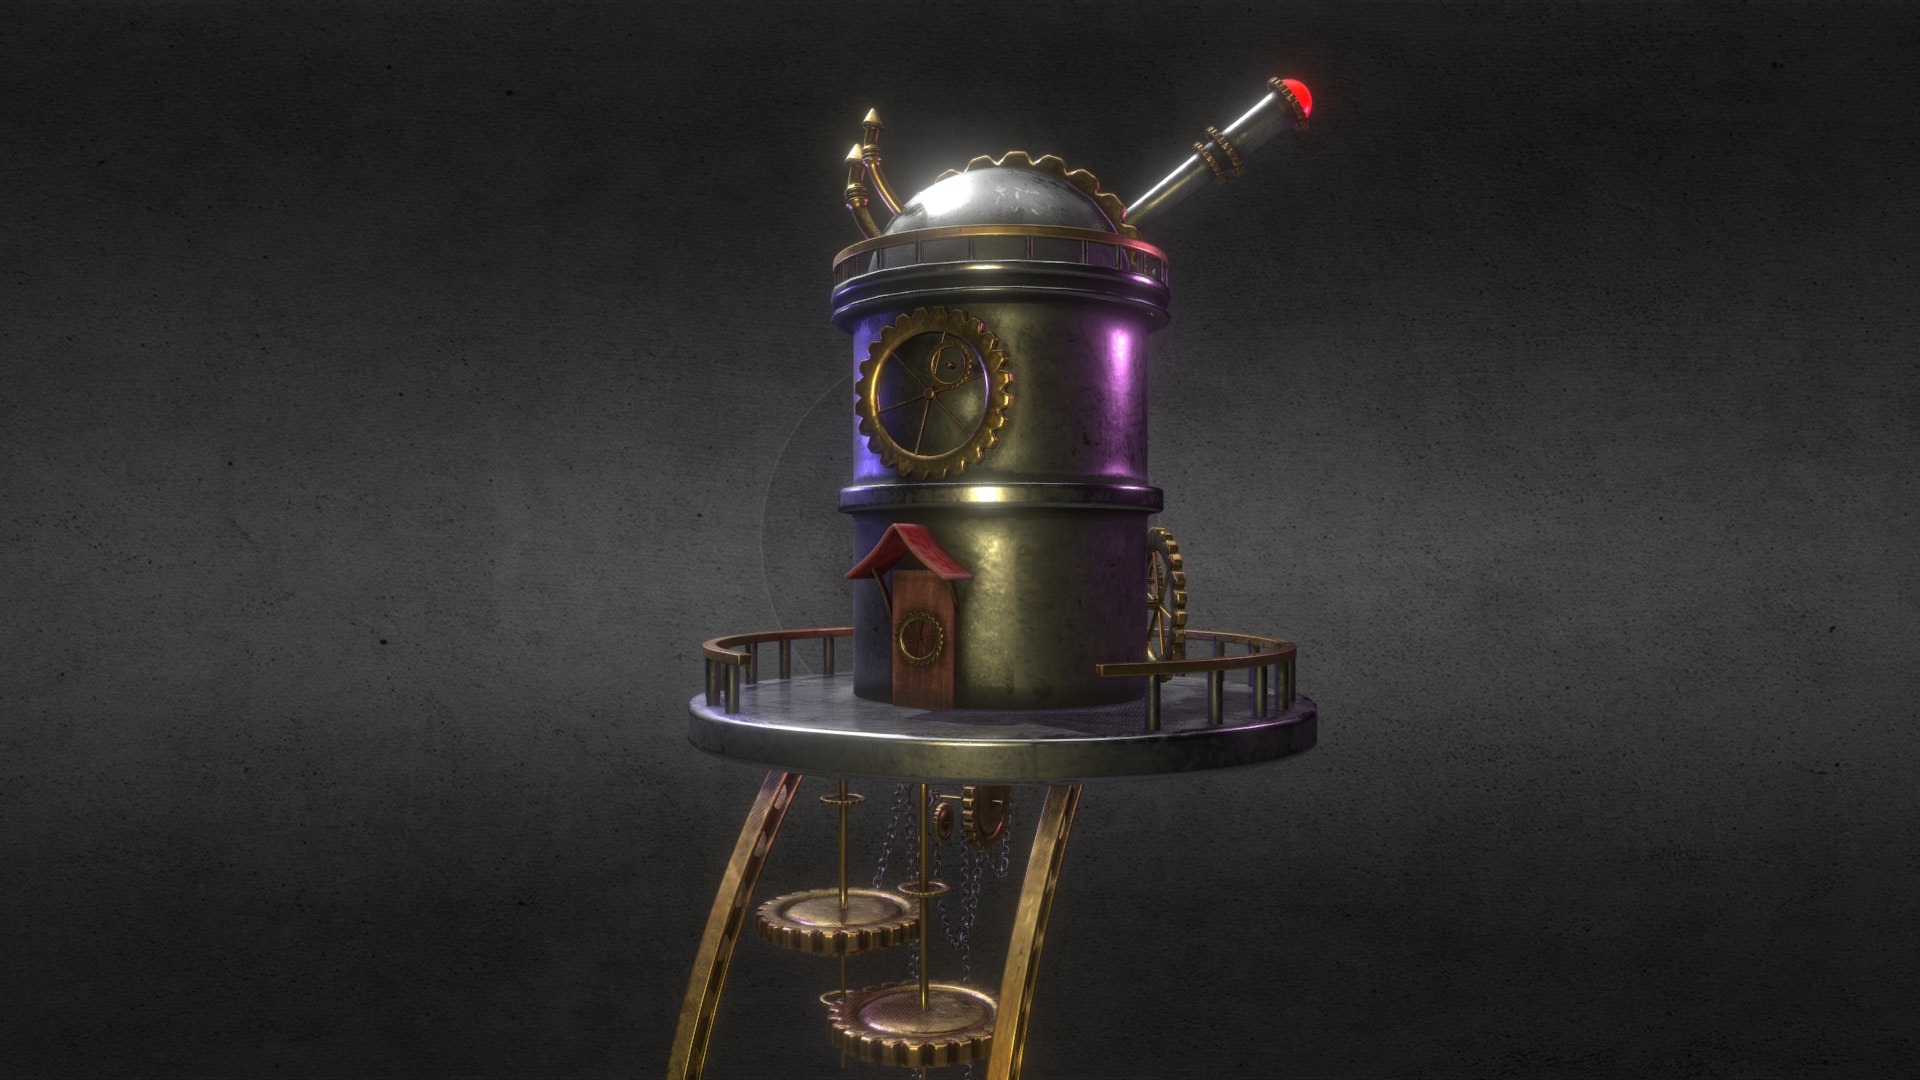 3D model Steampunk architecture - This is a 3D model of the Steampunk architecture. The 3D model is about a clock on a stand.